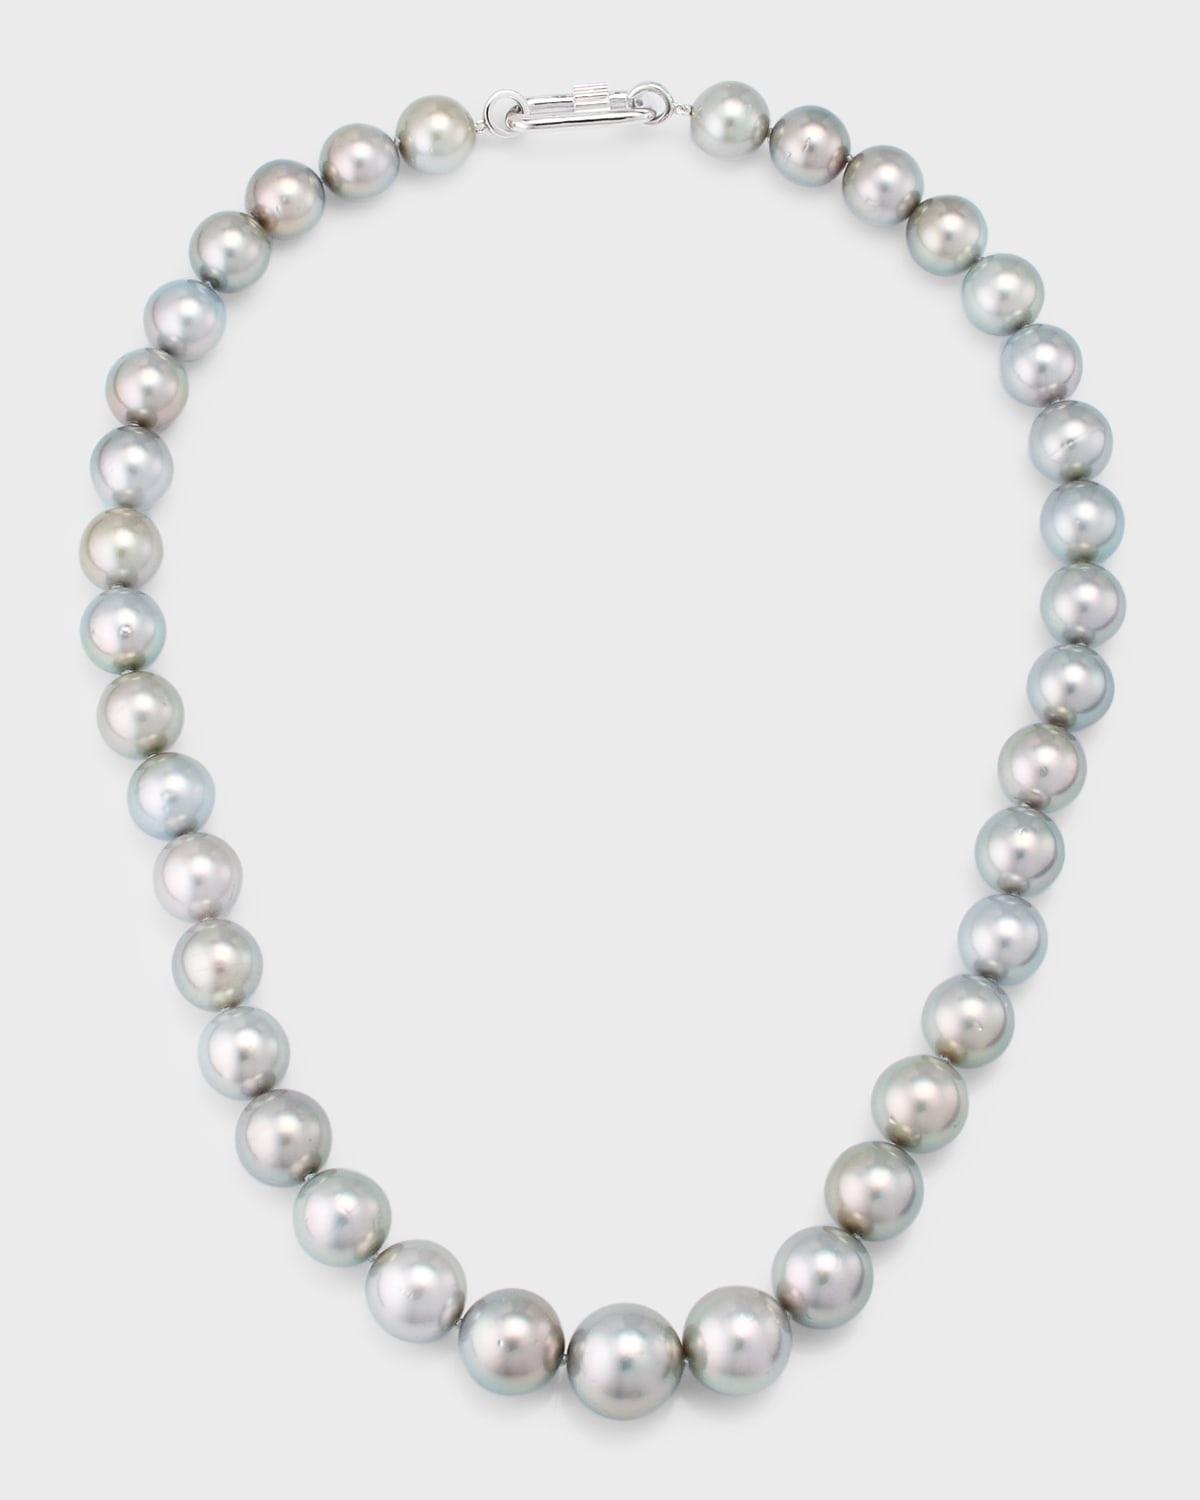 Pearls By Shari 18k White Gold Graduated Tahitian Pearl Necklace In Metallic